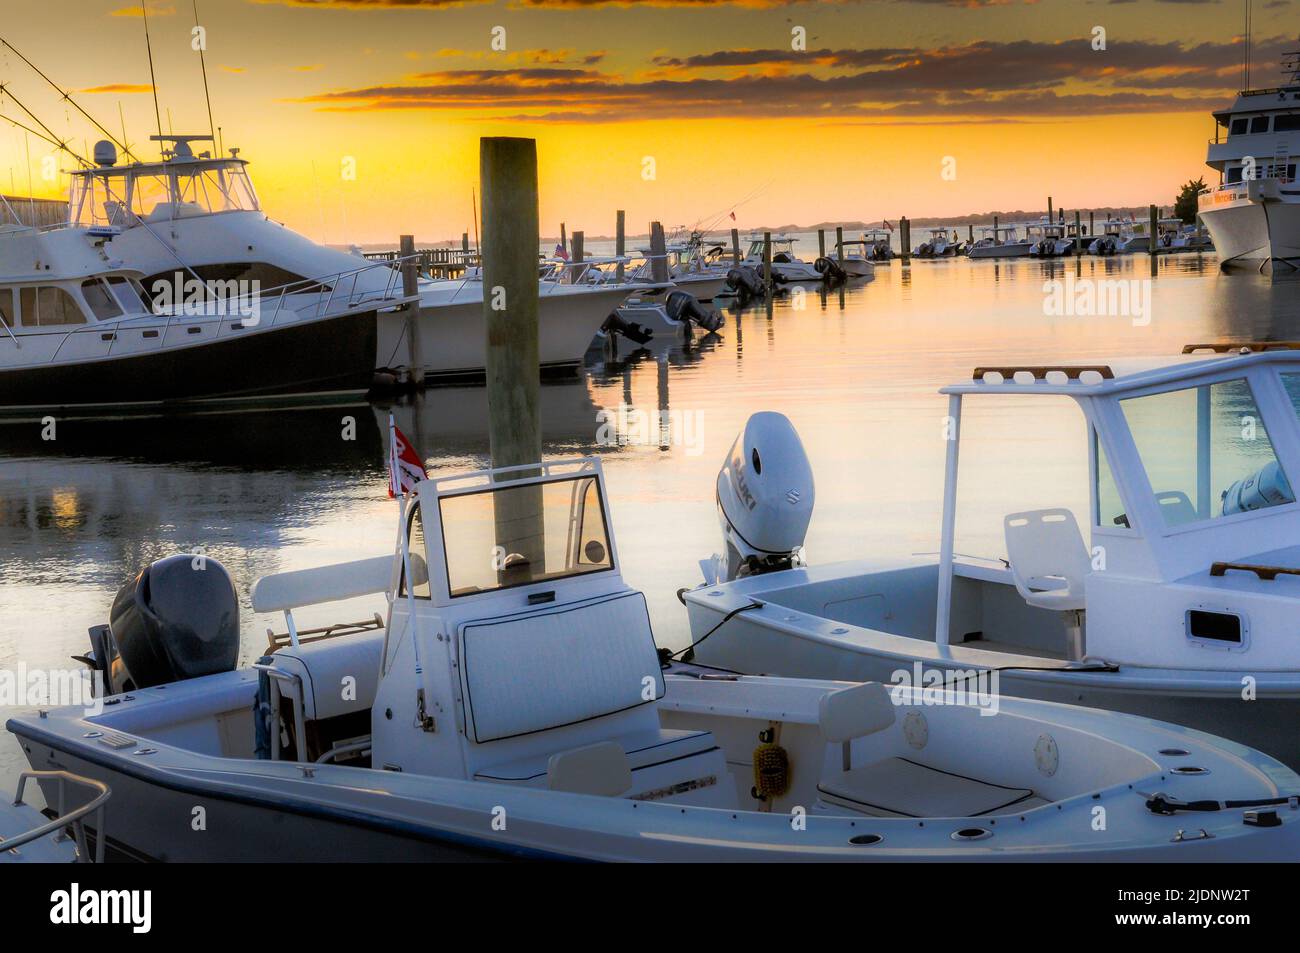 The sun sets on Barnstable Harbor full of boats of all sizes, showing the the Summer season is taking place on Cape Cod Massachusetts. Stock Photo